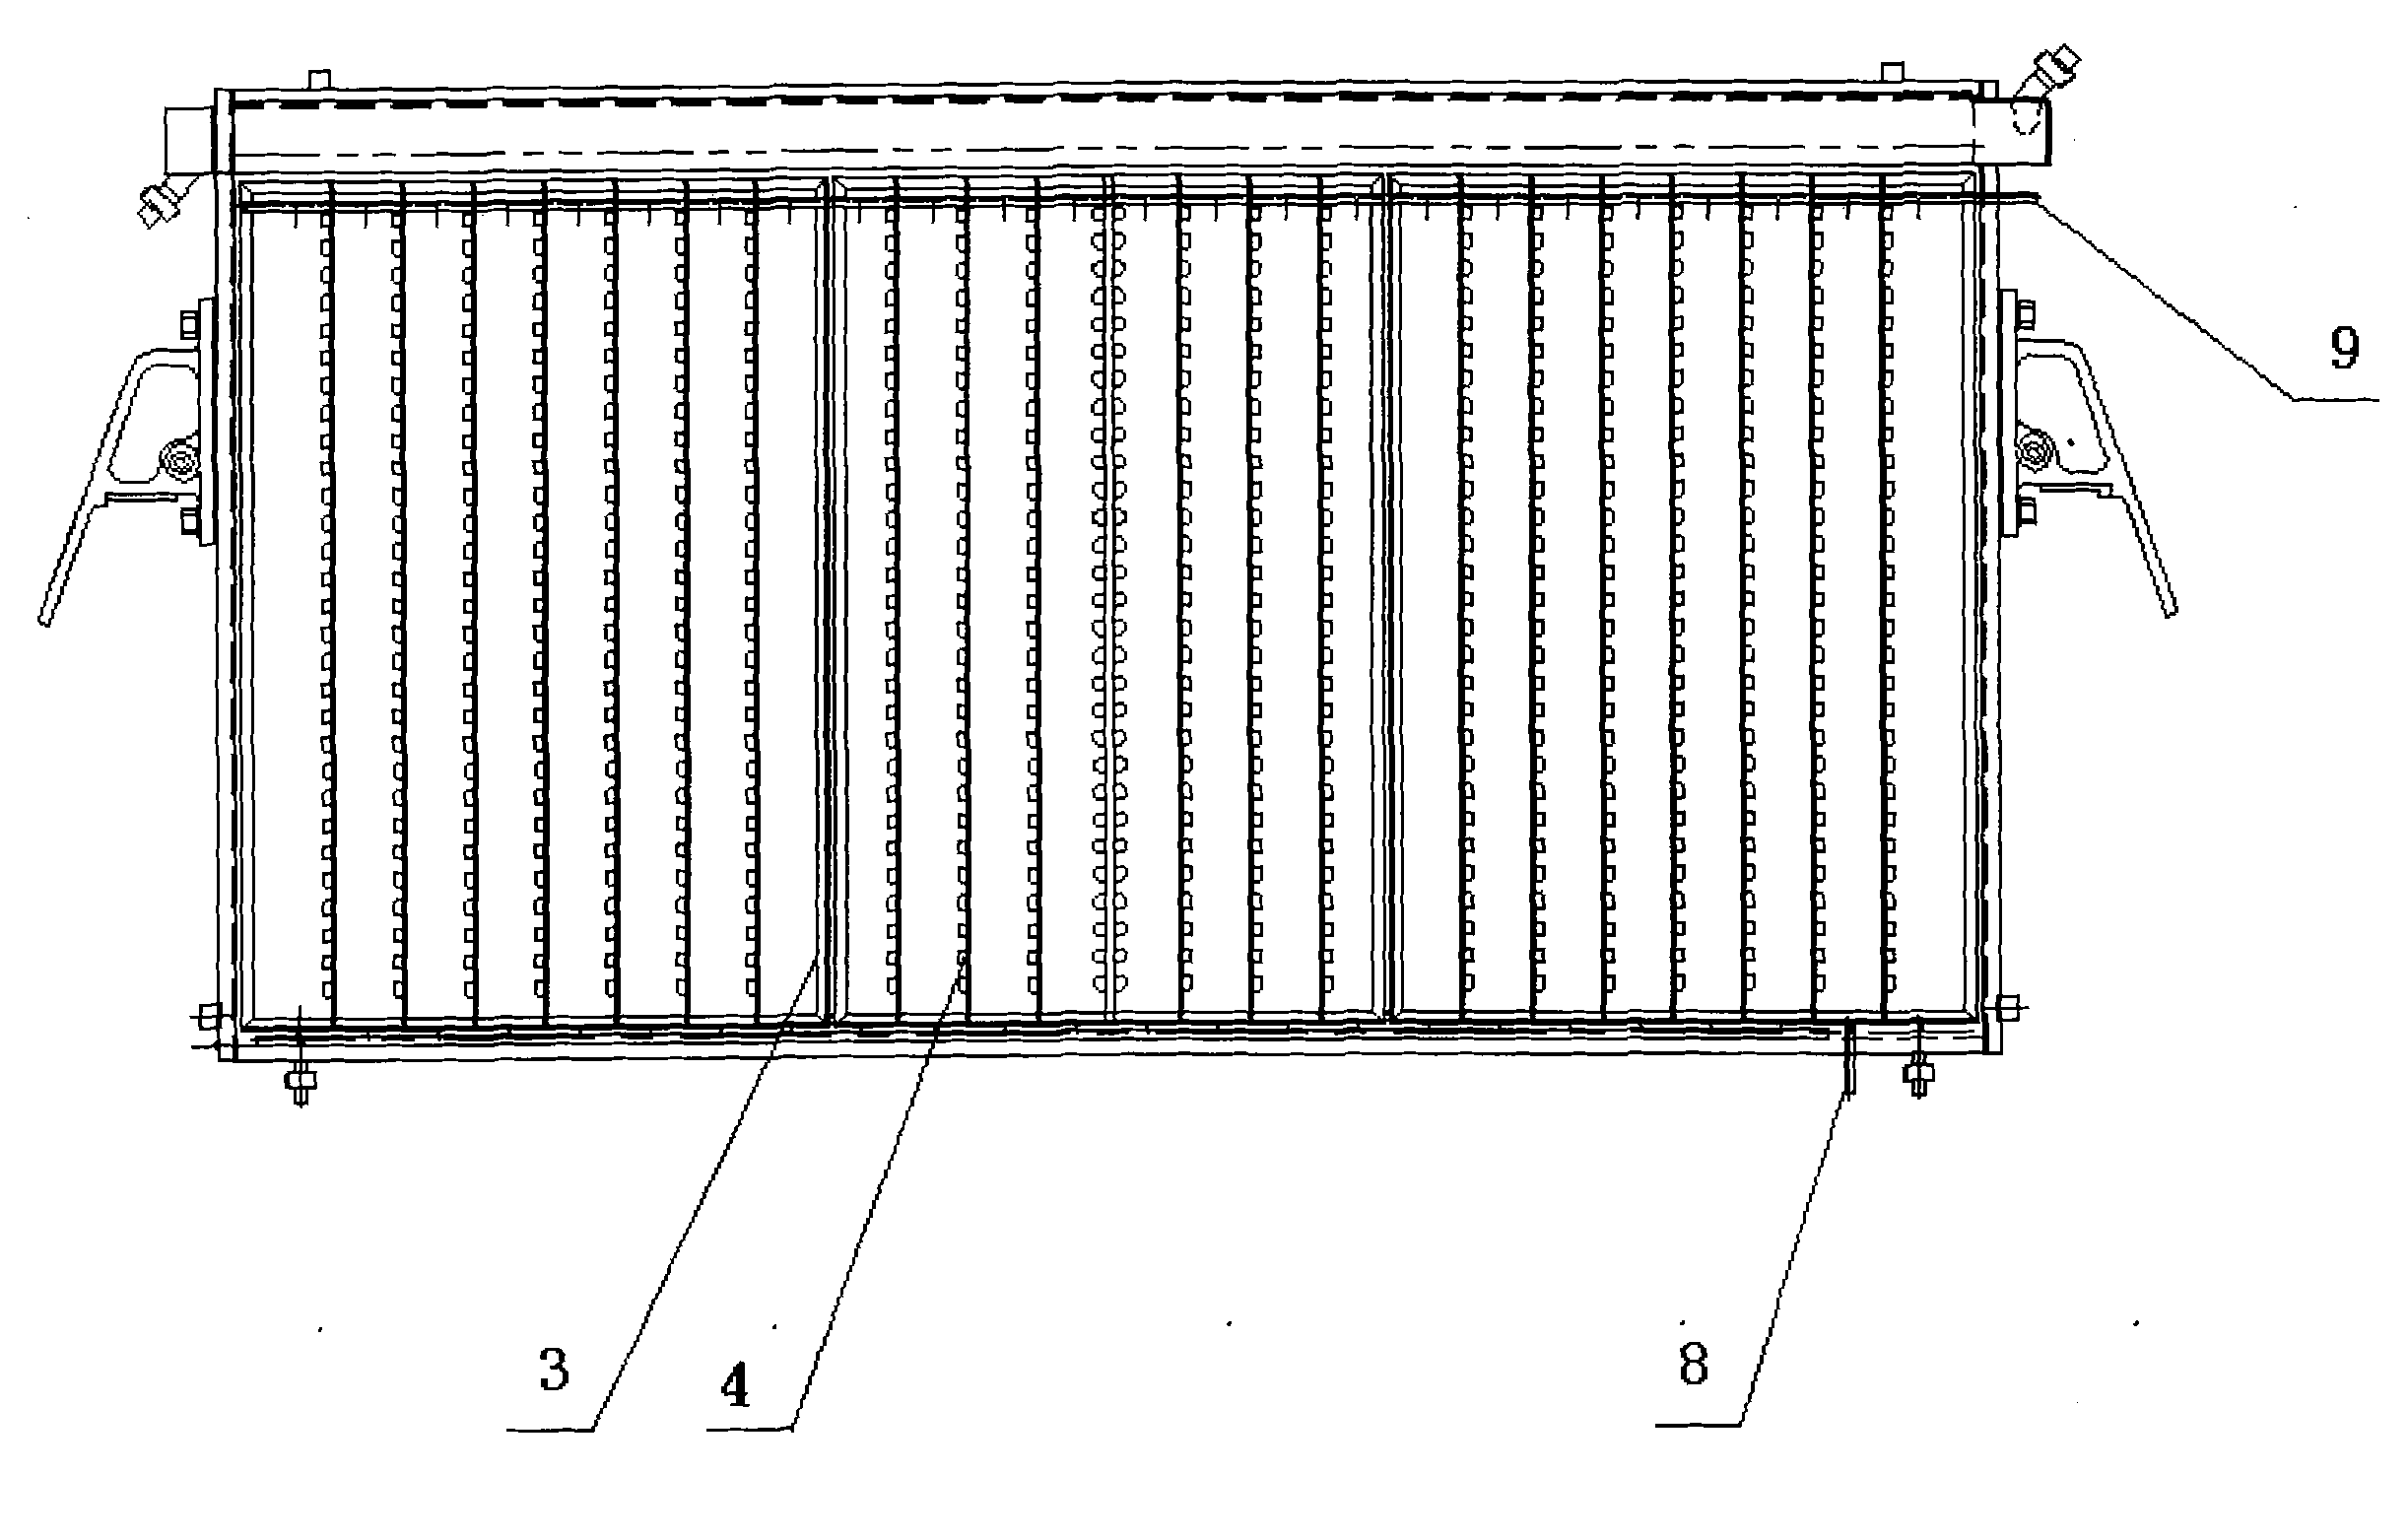 Diffusion electrode alkali producing device